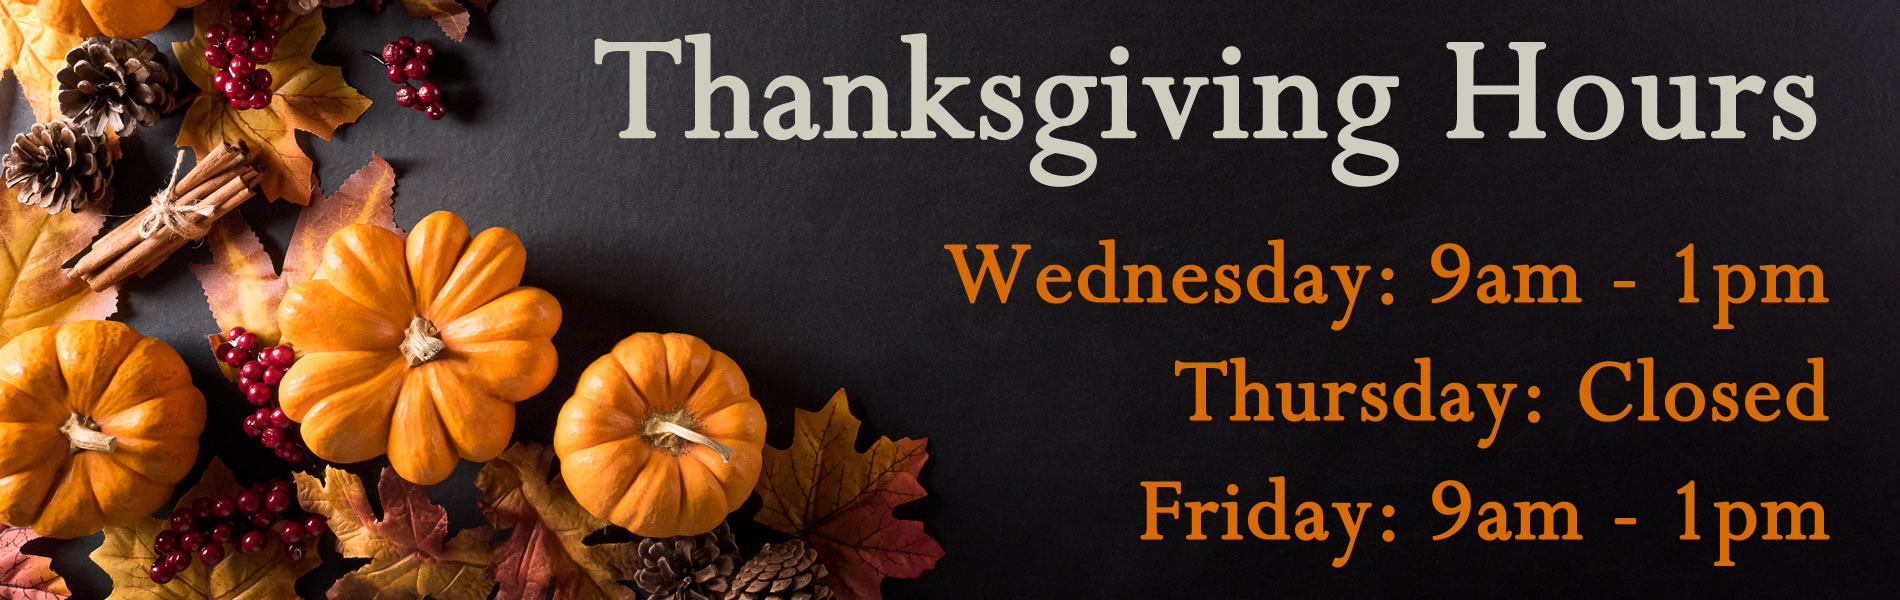 Thanksgiving hours: Wednesday 9am to 1pm , Thursday, Closed.  Friday, 9am to 1pm